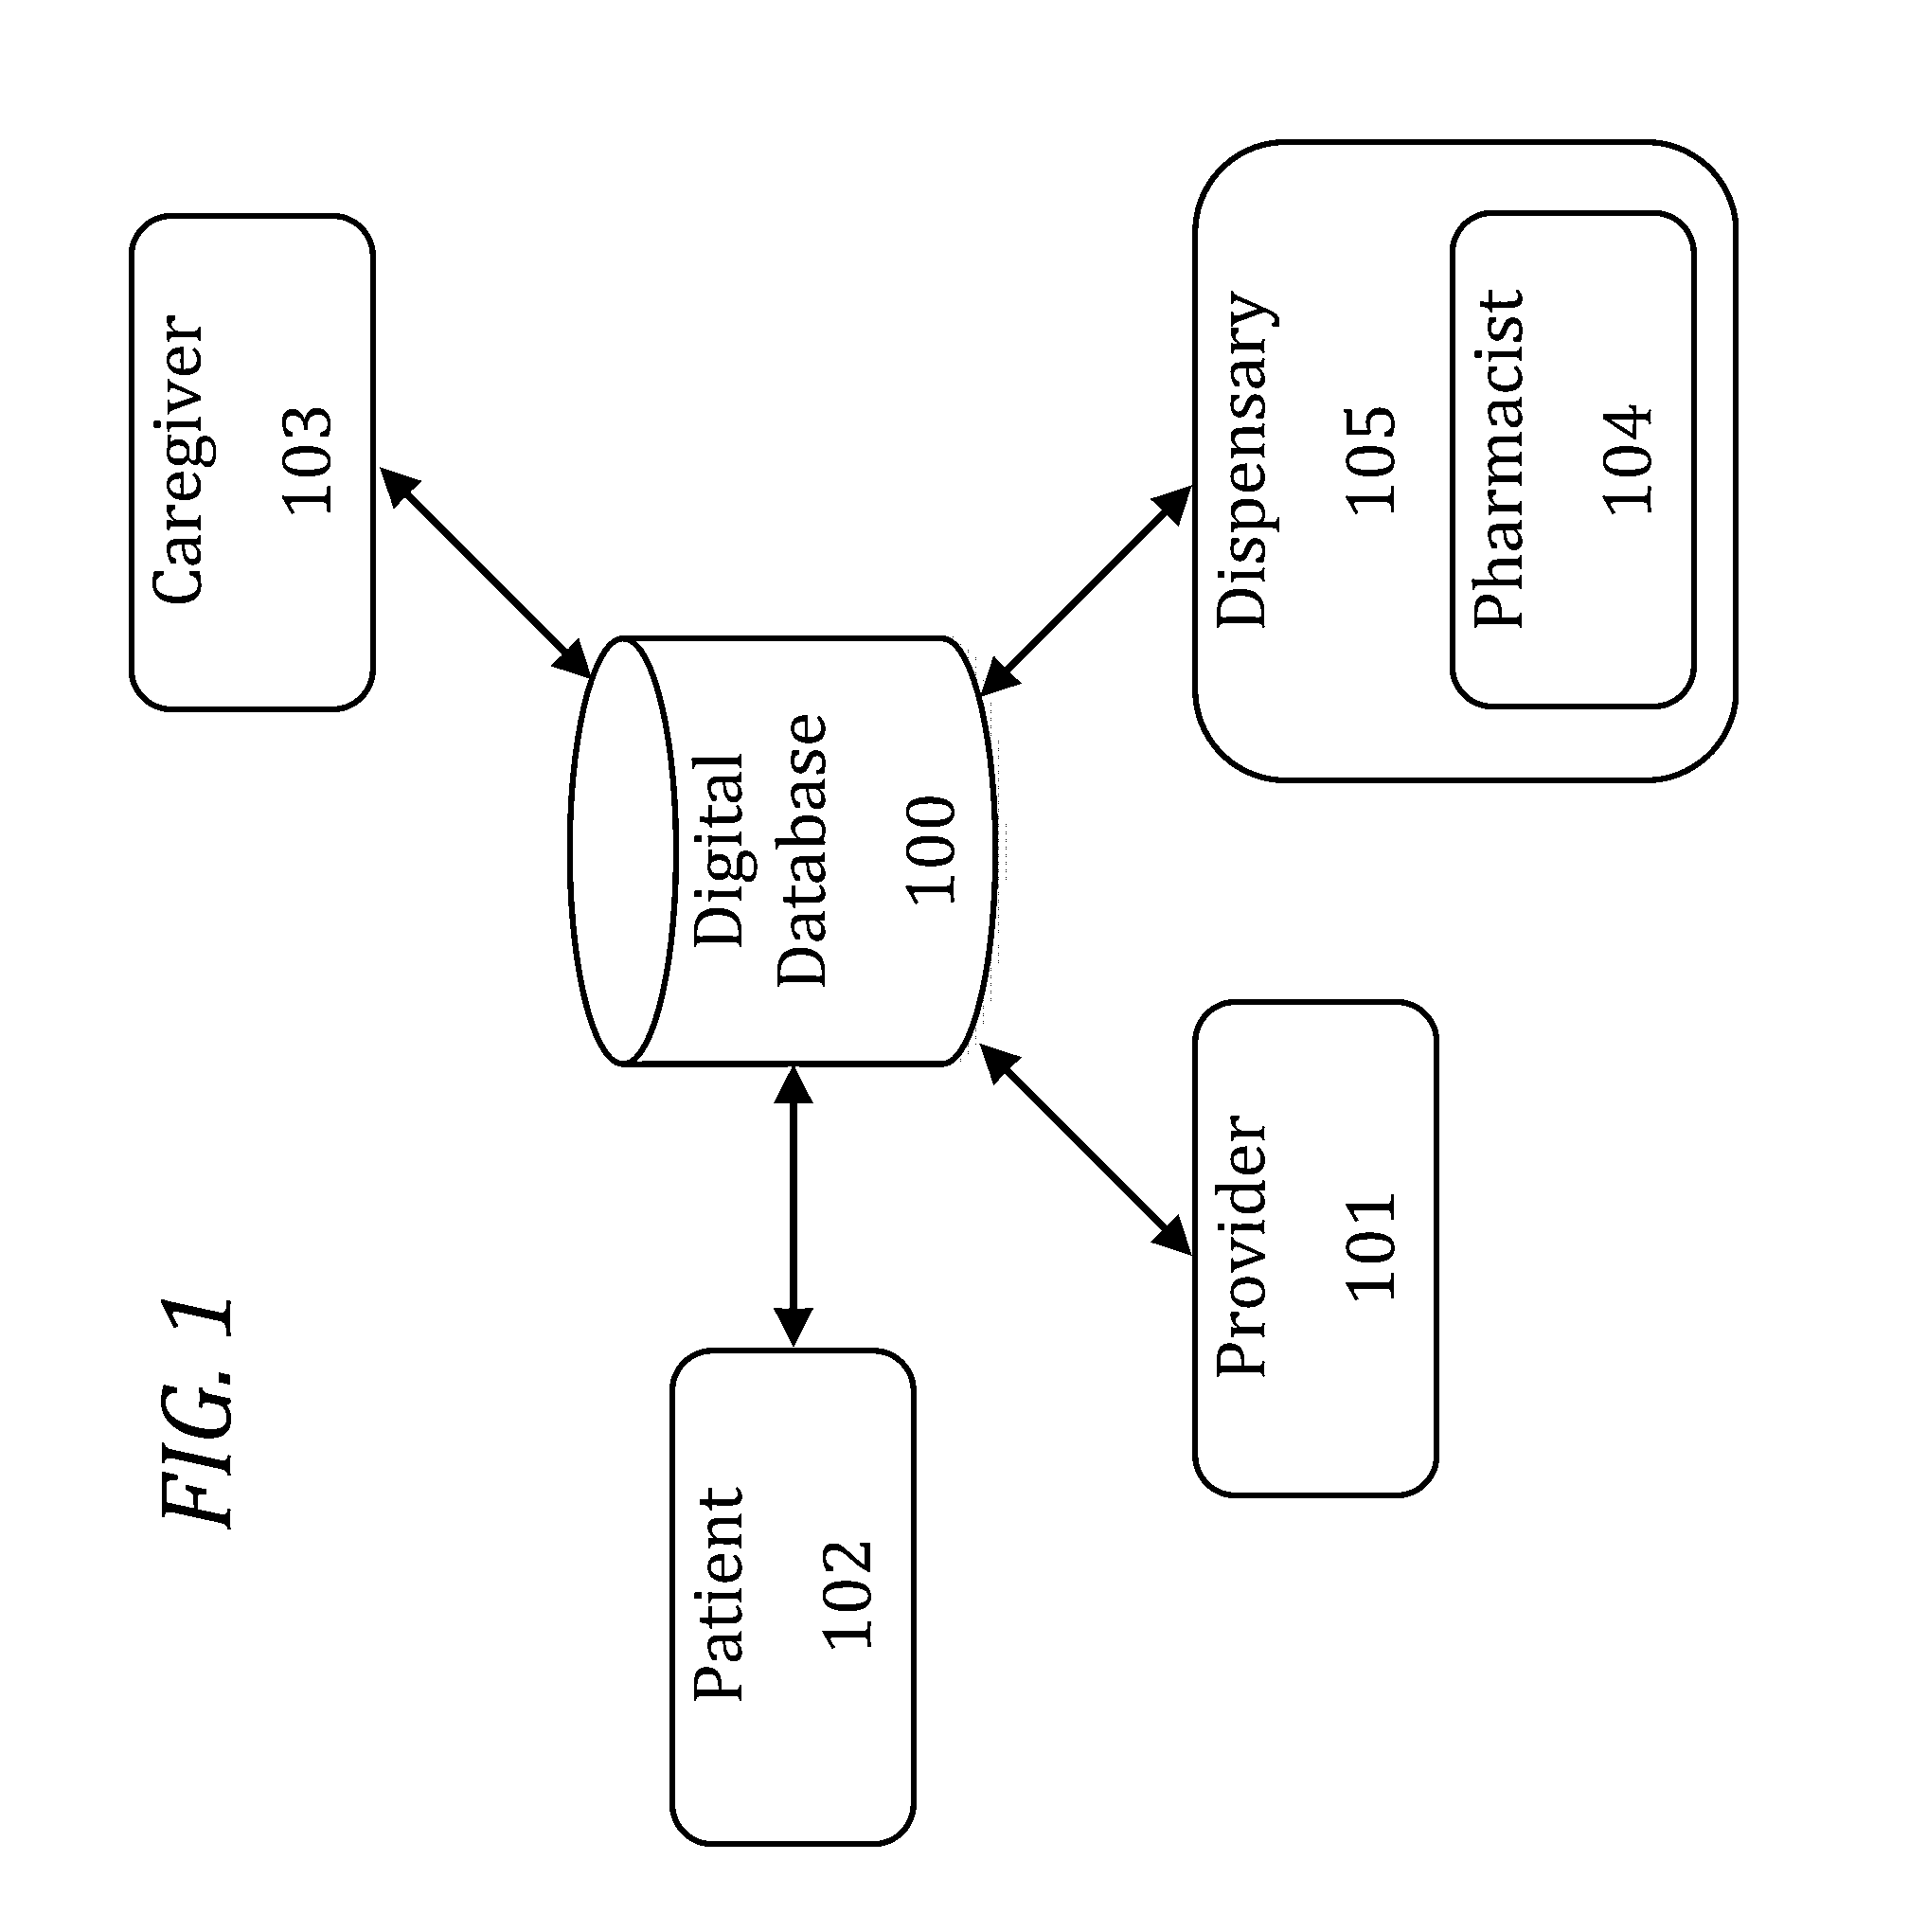 Systems and methods for generating, managing, and sharing digital scripts